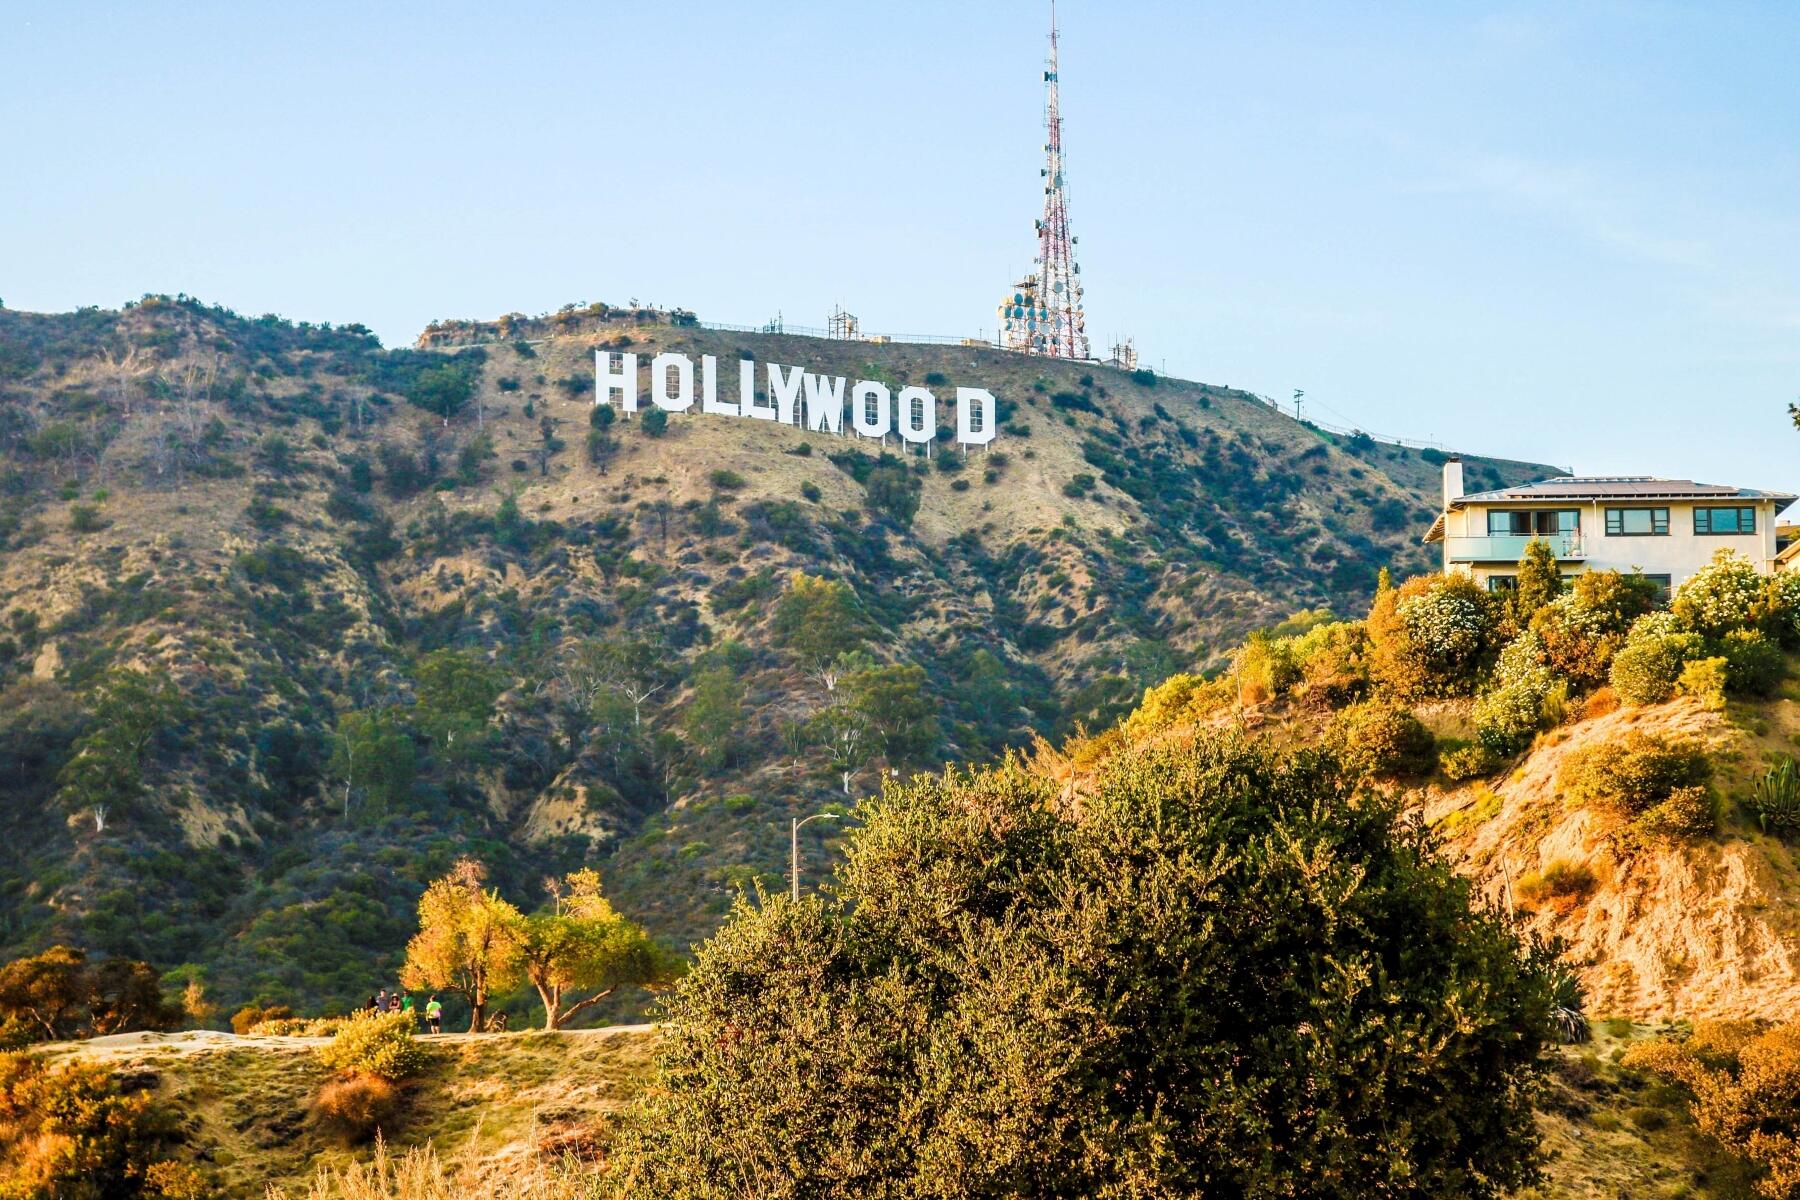 10 Best Places to See the Hollywood Sign in Los Angeles